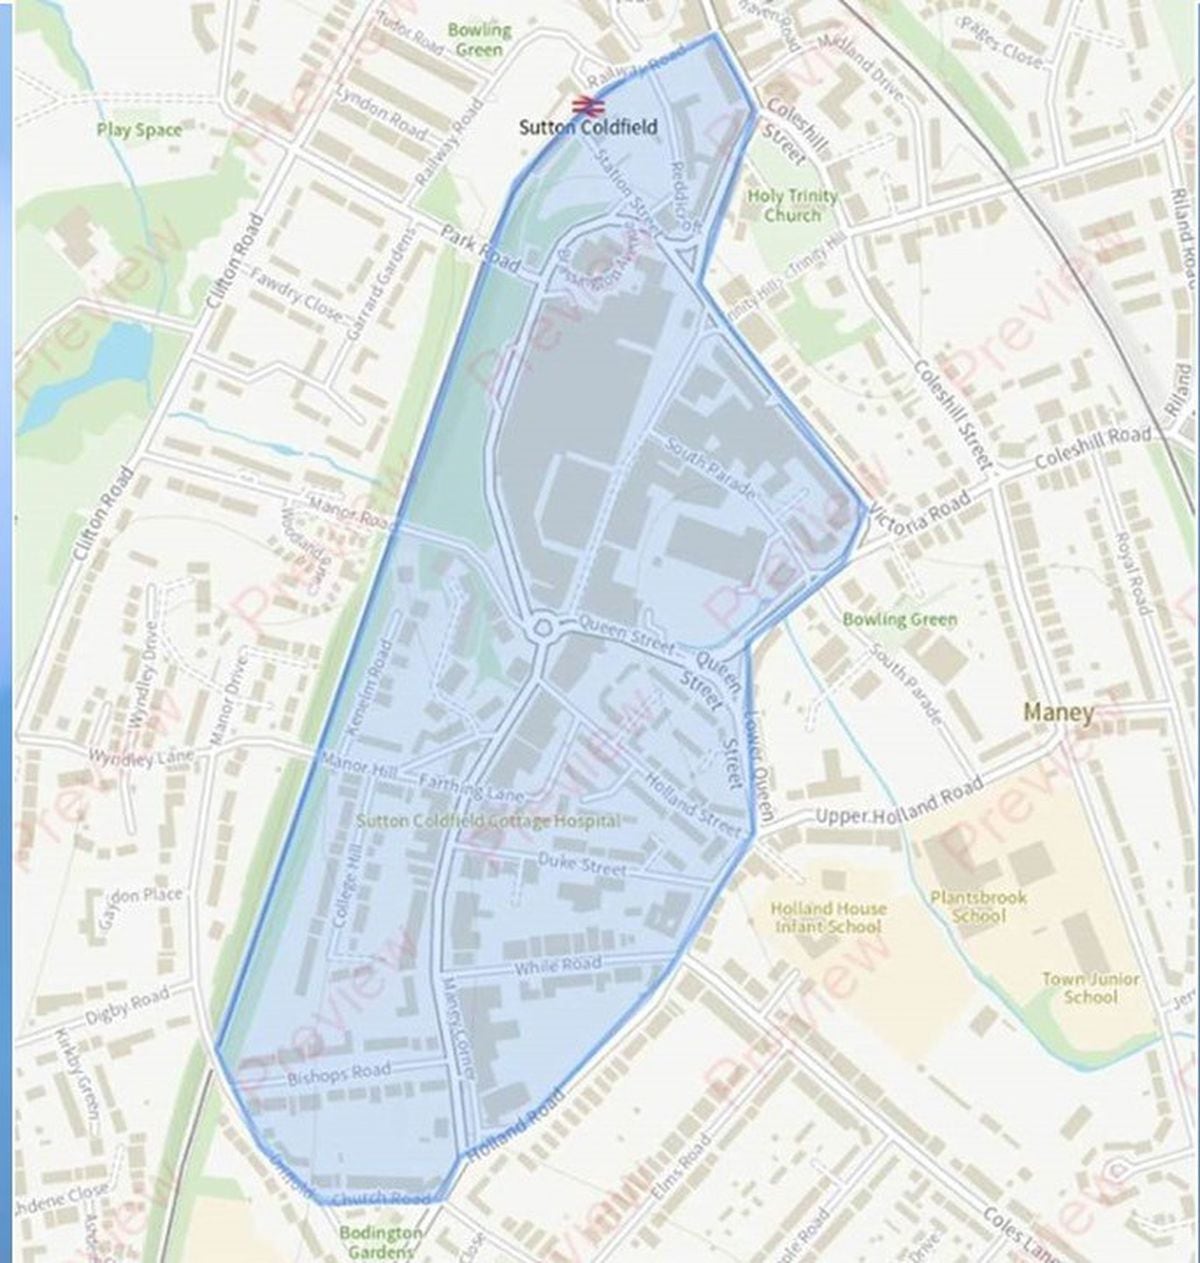 The dispersal order covers a wide area around Sutton Coldfield town centre. Photo: West Midlands Police